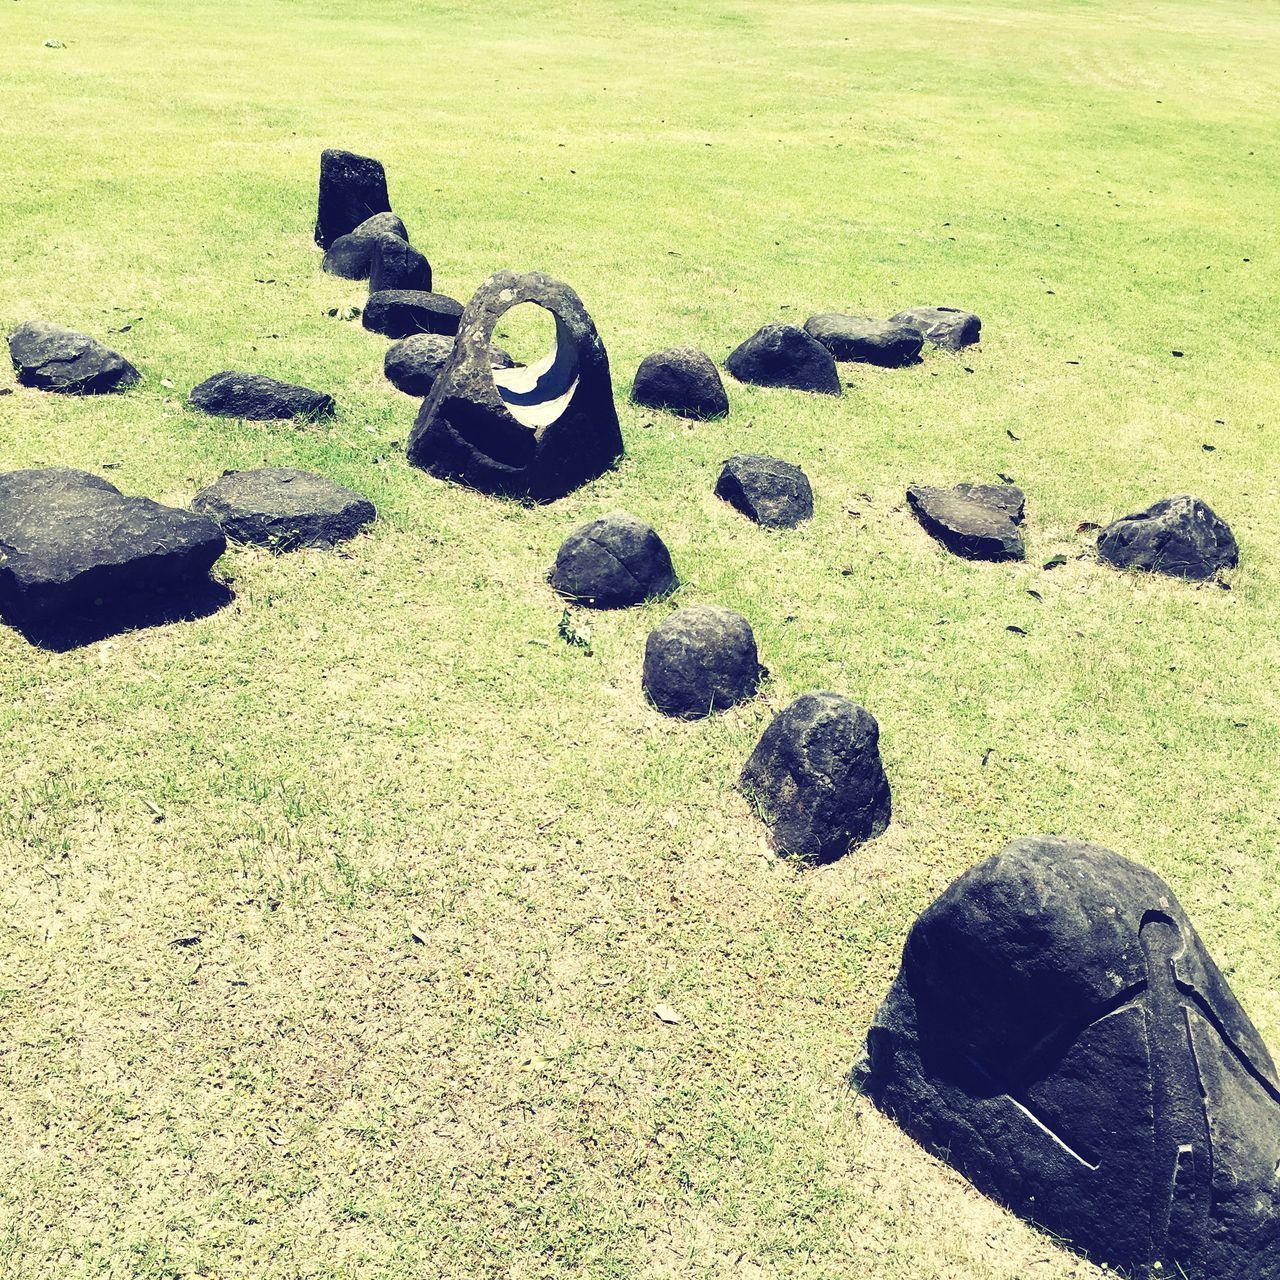 HIGH ANGLE VIEW OF STONES ON GRASS